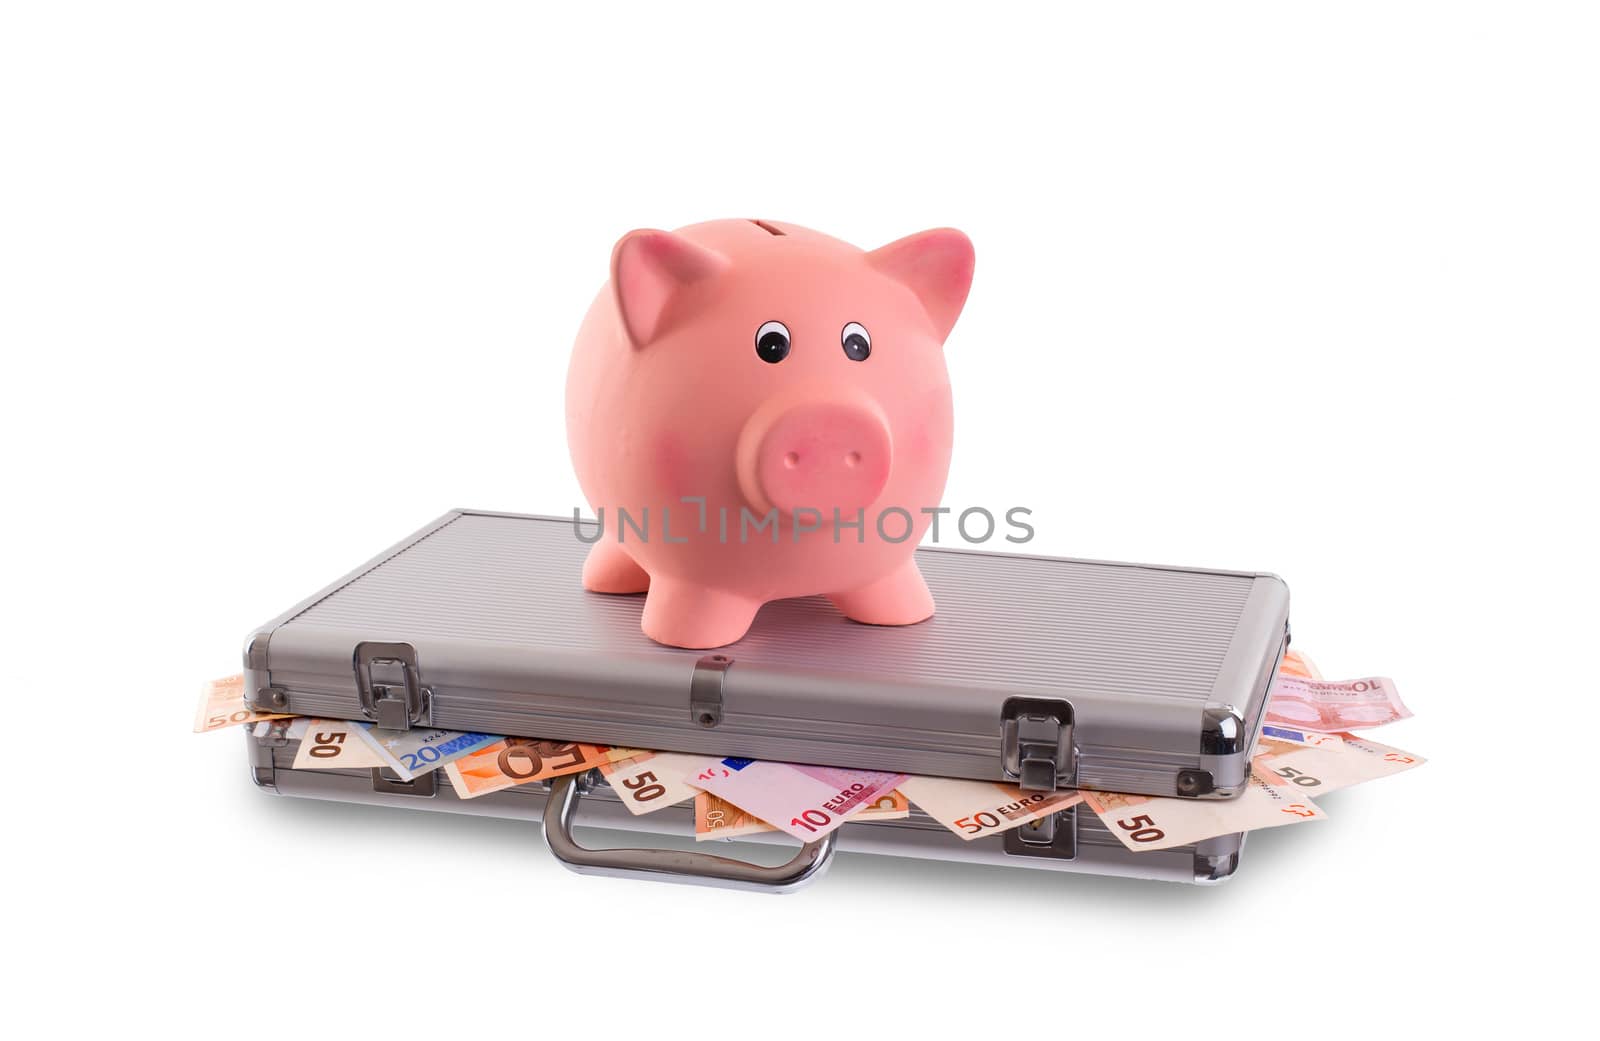 Unique pink ceramic piggy bank on top of metal case filled with money